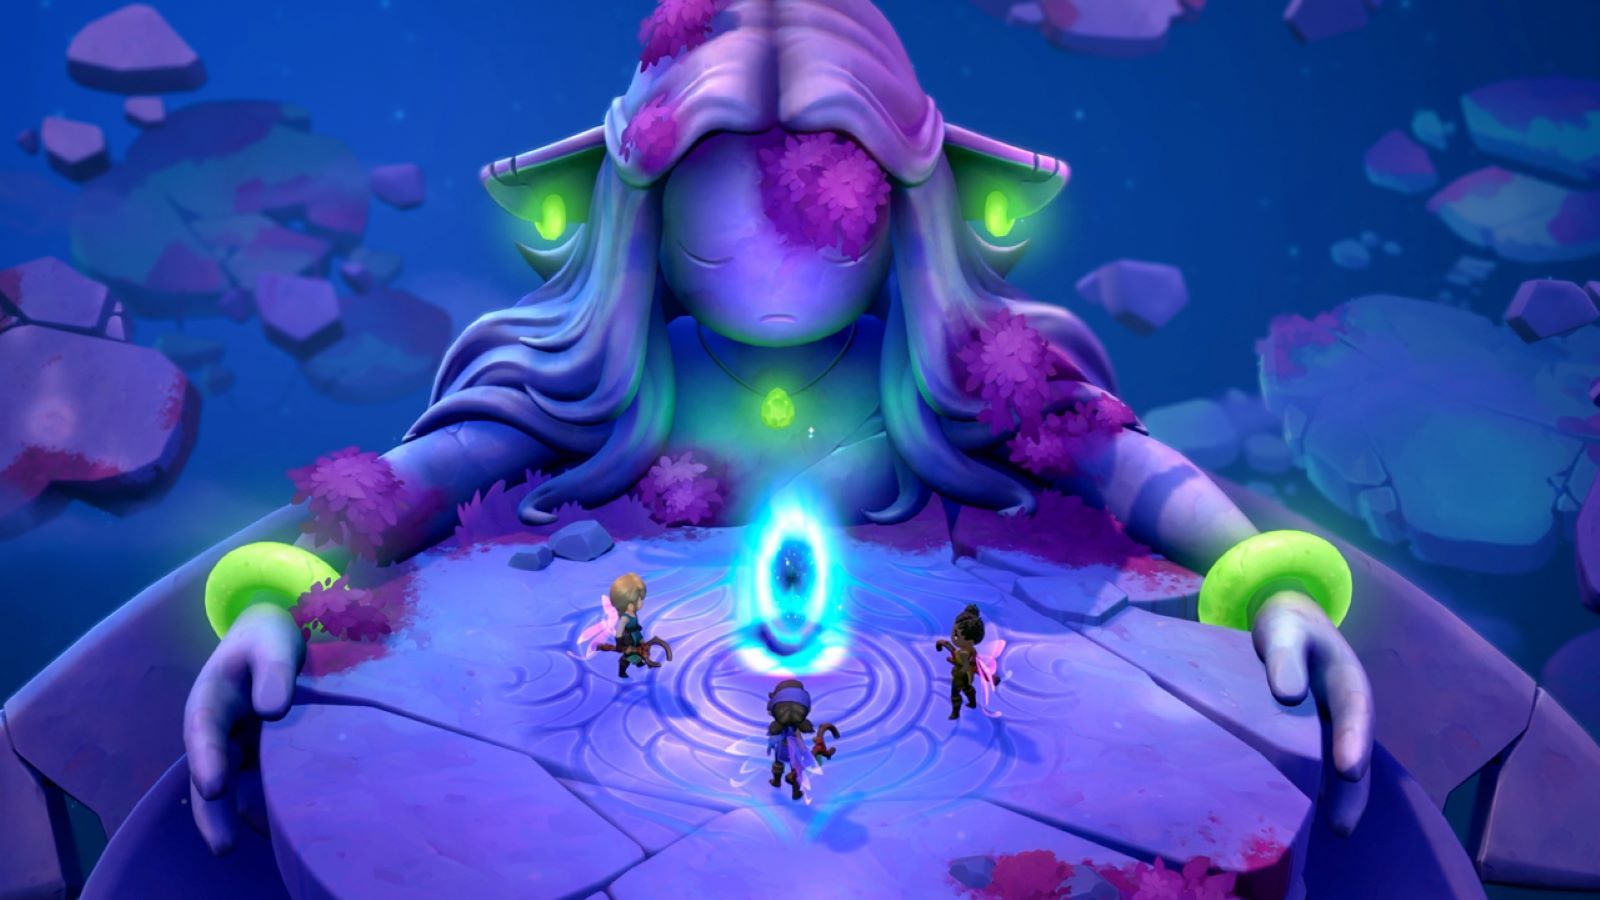 A group of players stand before a large statue with green jewelry and purple moss